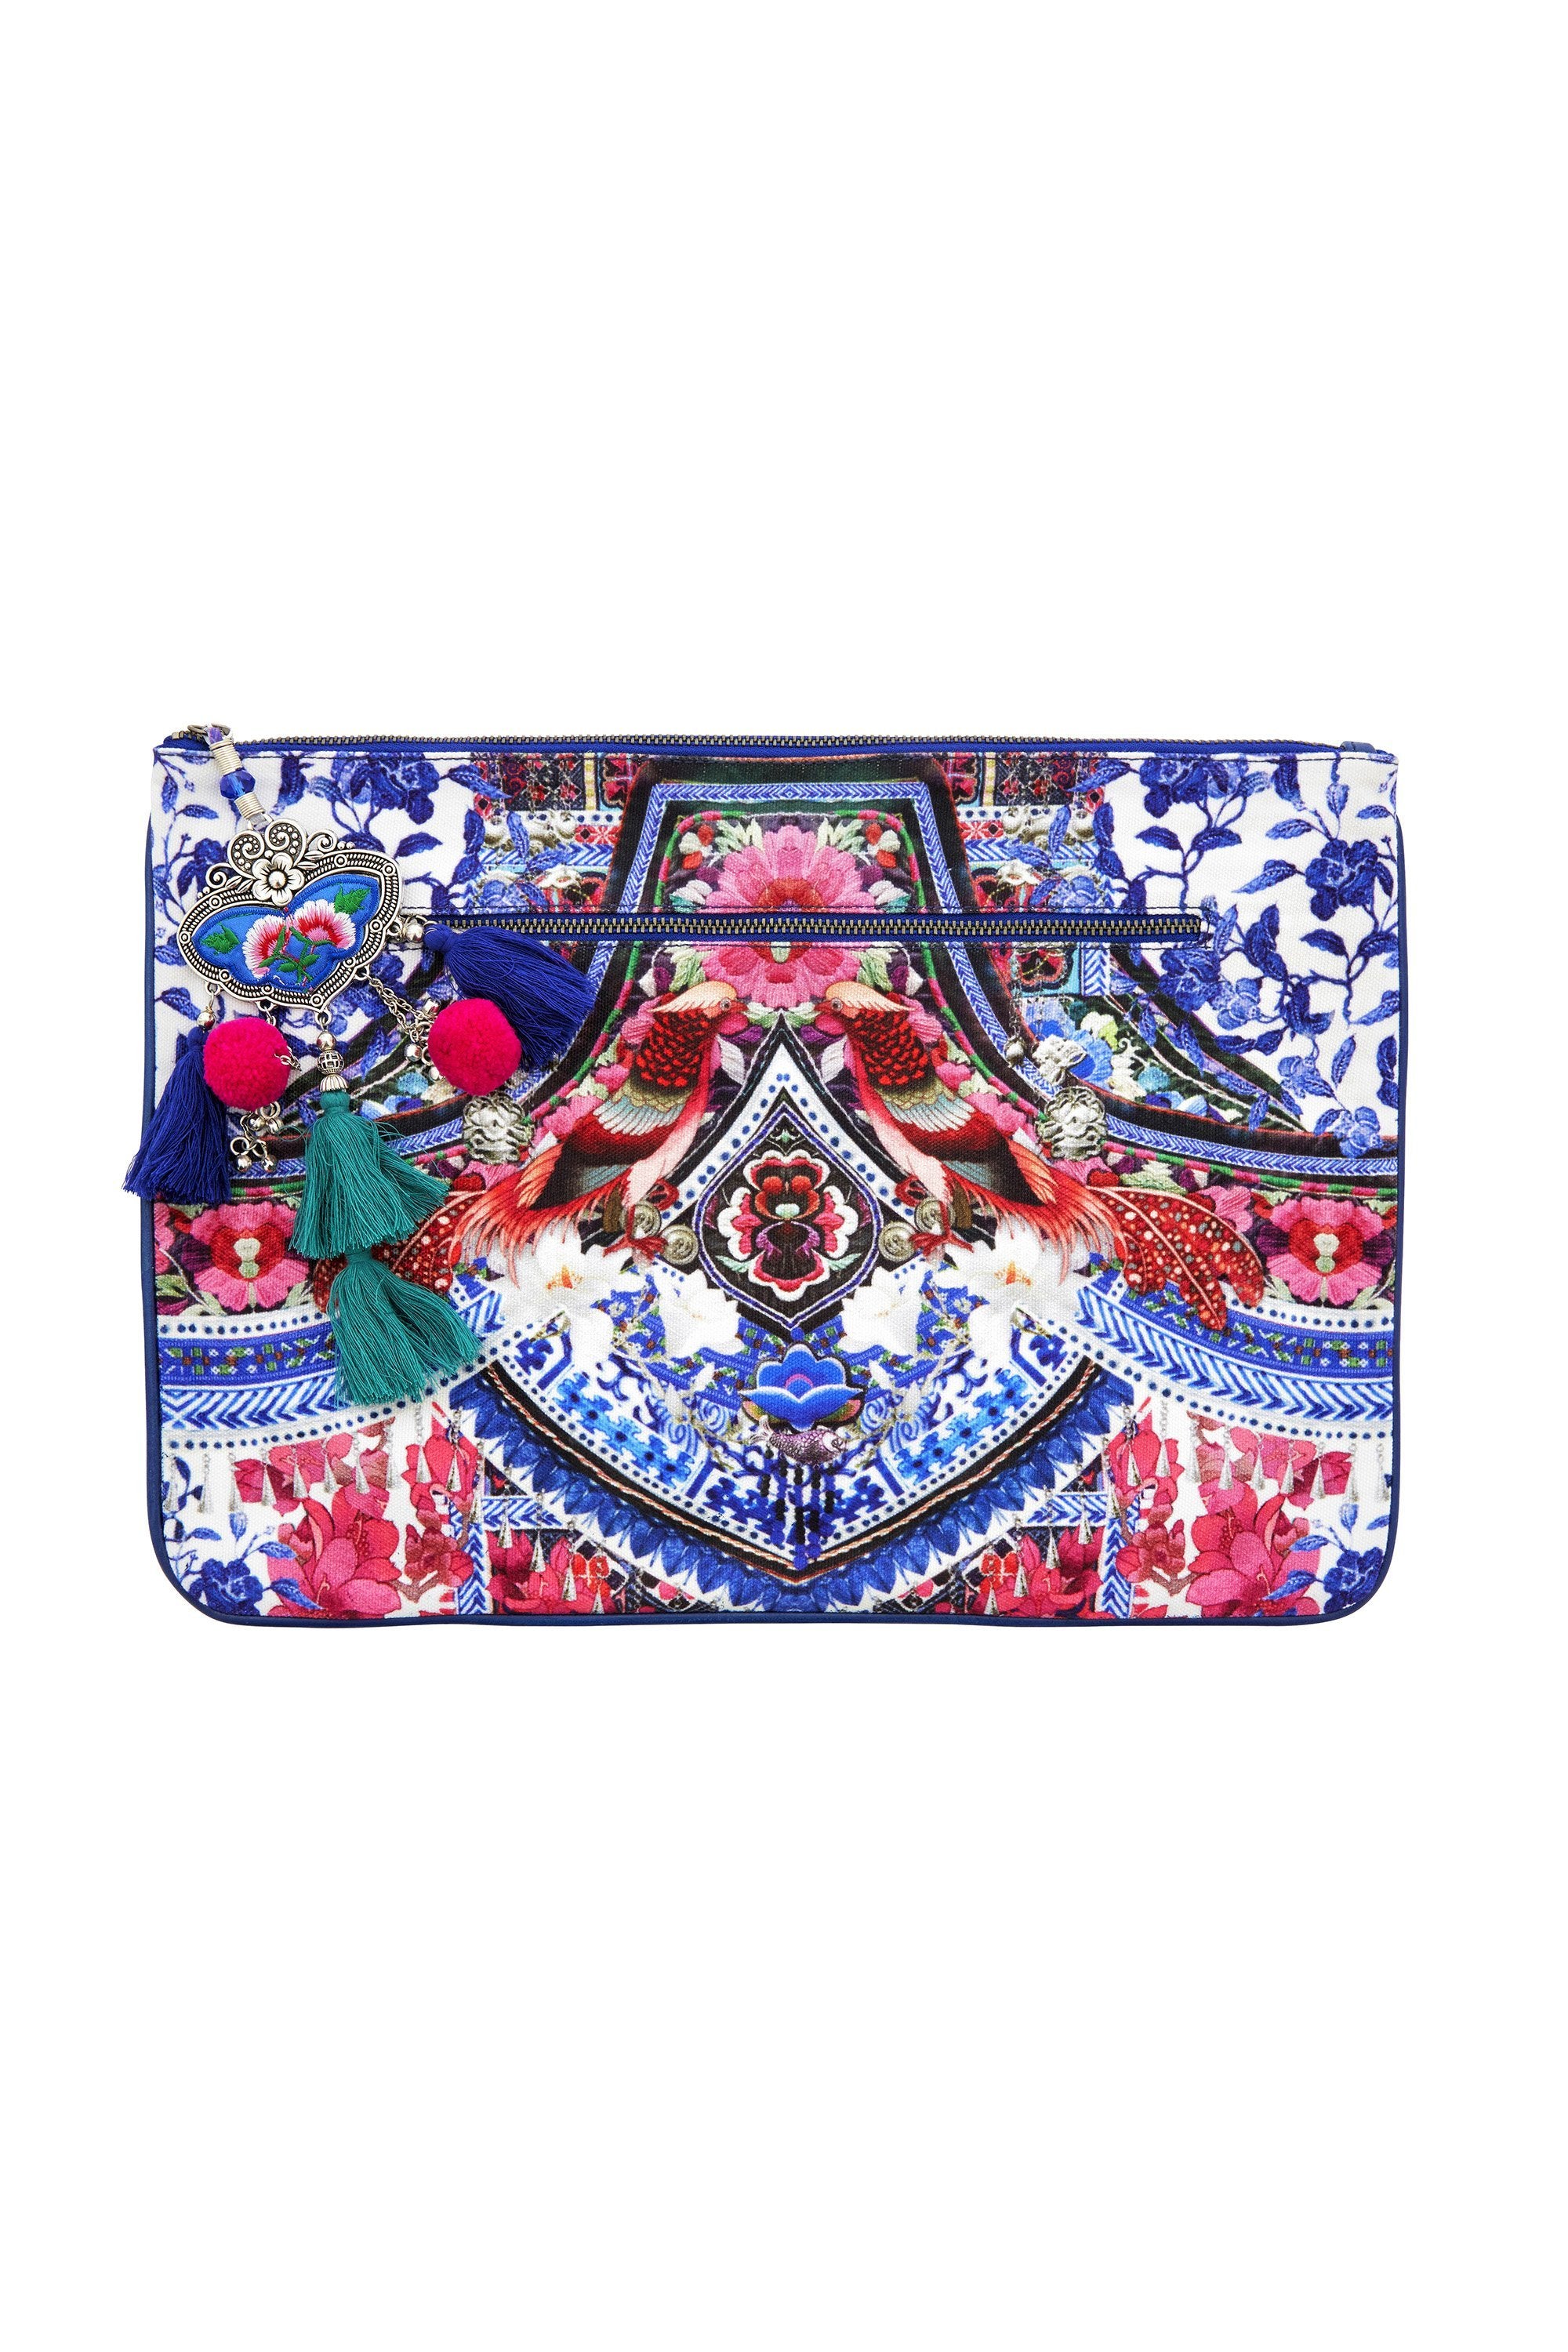 FROM KAILI WITH LOVE LARGE CANVAS CLUTCH